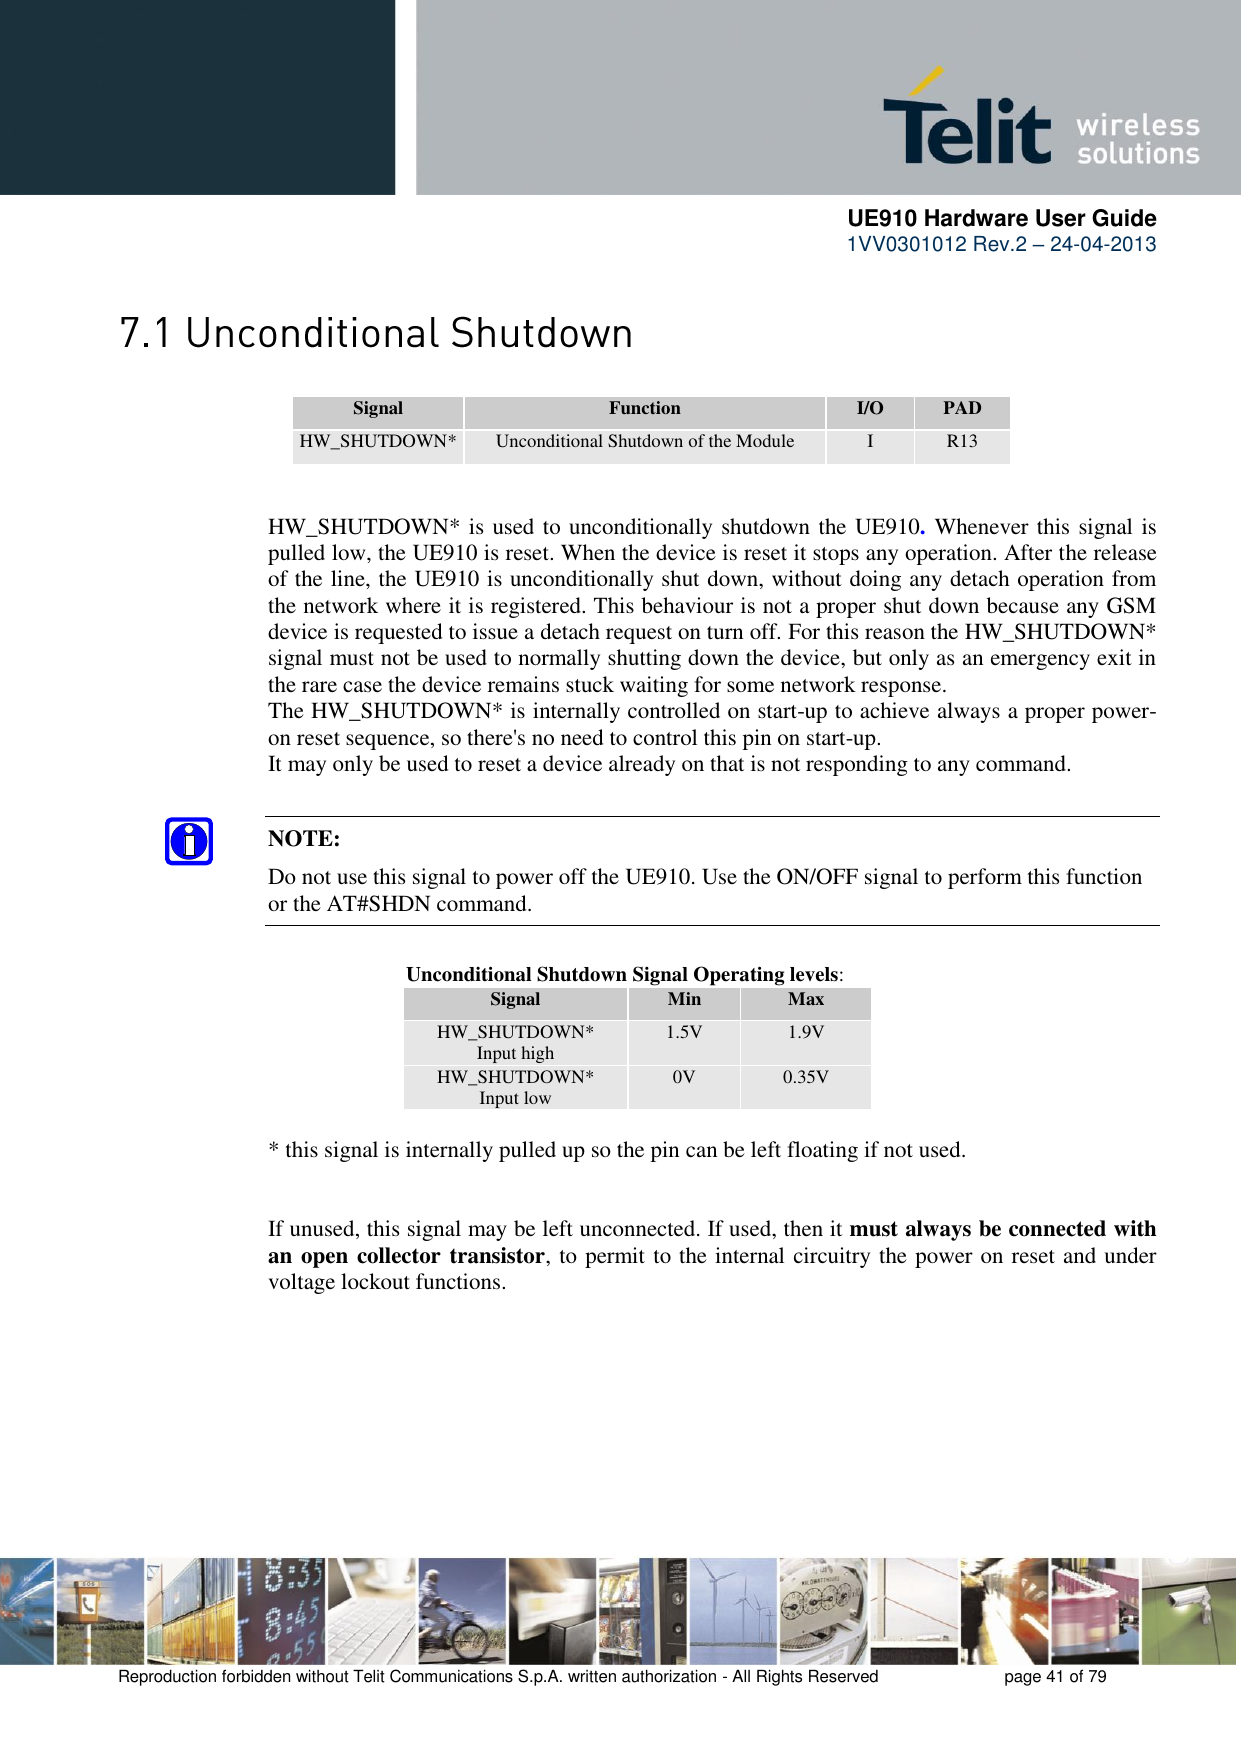      UE910 Hardware User Guide  1VV0301012 Rev.2 – 24-04-2013    Reproduction forbidden without Telit Communications S.p.A. written authorization - All Rights Reserved    page 41 of 79   Signal Function I/O PAD HW_SHUTDOWN* Unconditional Shutdown of the Module I R13   HW_SHUTDOWN* is used to unconditionally shutdown the UE910. Whenever this signal is pulled low, the UE910 is reset. When the device is reset it stops any operation. After the release of the line, the UE910 is unconditionally shut down, without doing any detach operation from the network where it is registered. This behaviour is not a proper shut down because any GSM device is requested to issue a detach request on turn off. For this reason the HW_SHUTDOWN* signal must not be used to normally shutting down the device, but only as an emergency exit in the rare case the device remains stuck waiting for some network response. The HW_SHUTDOWN* is internally controlled on start-up to achieve always a proper power-on reset sequence, so there&apos;s no need to control this pin on start-up.  It may only be used to reset a device already on that is not responding to any command.  NOTE: Do not use this signal to power off the UE910. Use the ON/OFF signal to perform this function or the AT#SHDN command.         Unconditional Shutdown Signal Operating levels: Signal Min Max HW_SHUTDOWN*   Input high 1.5V 1.9V HW_SHUTDOWN*   Input low 0V 0.35V  * this signal is internally pulled up so the pin can be left floating if not used.   If unused, this signal may be left unconnected. If used, then it must always be connected with an open collector transistor, to permit to the internal circuitry the power on reset and under voltage lockout functions.  